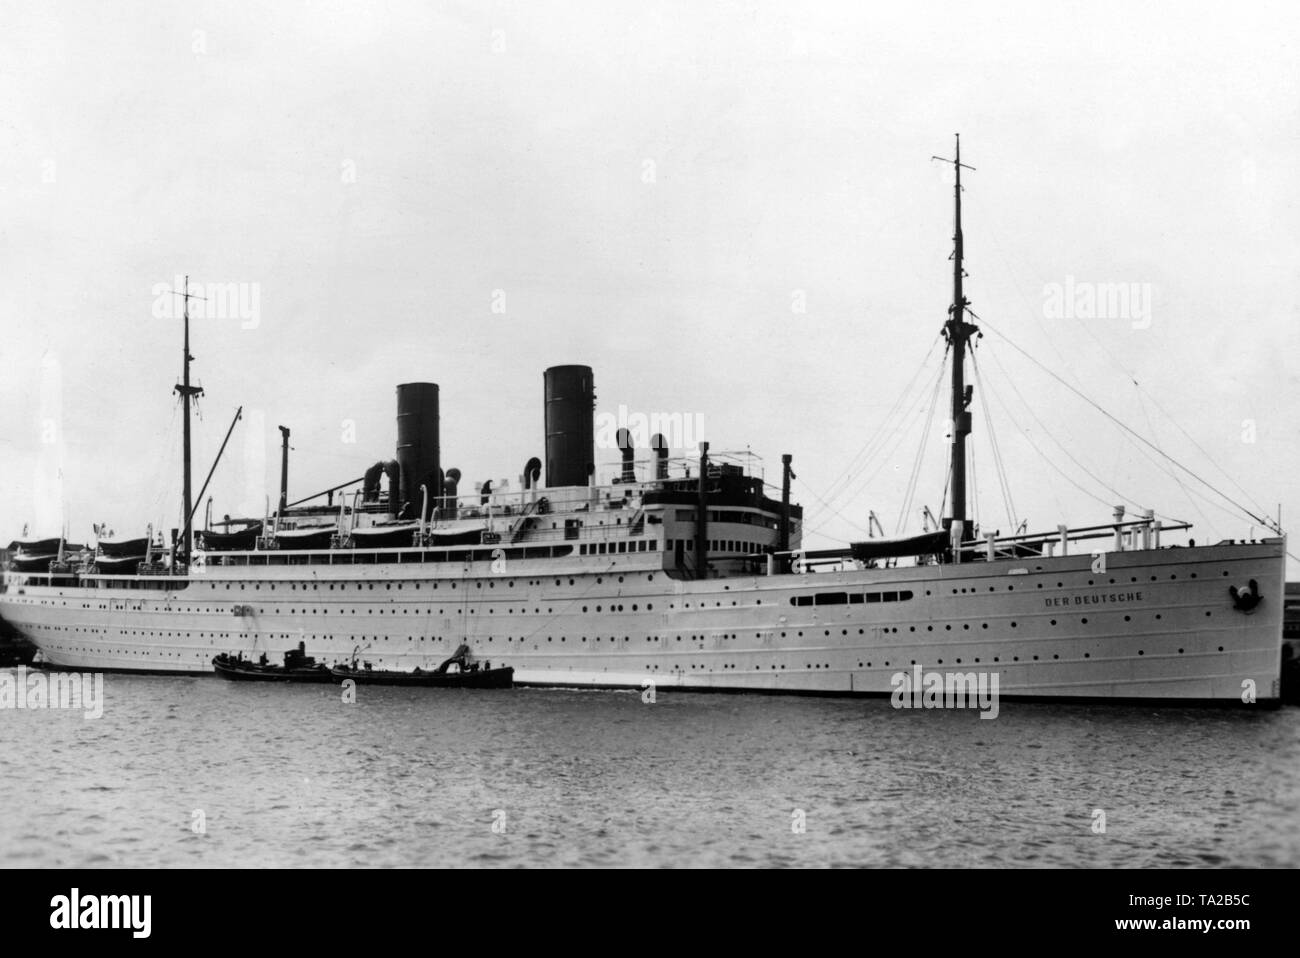 After the sinking of the KdF ship 'Dresden', its substitute, the 'Sierra Cordoba' of the Norddeutscher Lloyd (North German Lloyd), was renamed 'Der Deutsche' in Bremerhaven. Here, the 'Der Deutsche' at sea with 900 vacationers on board. Stock Photo